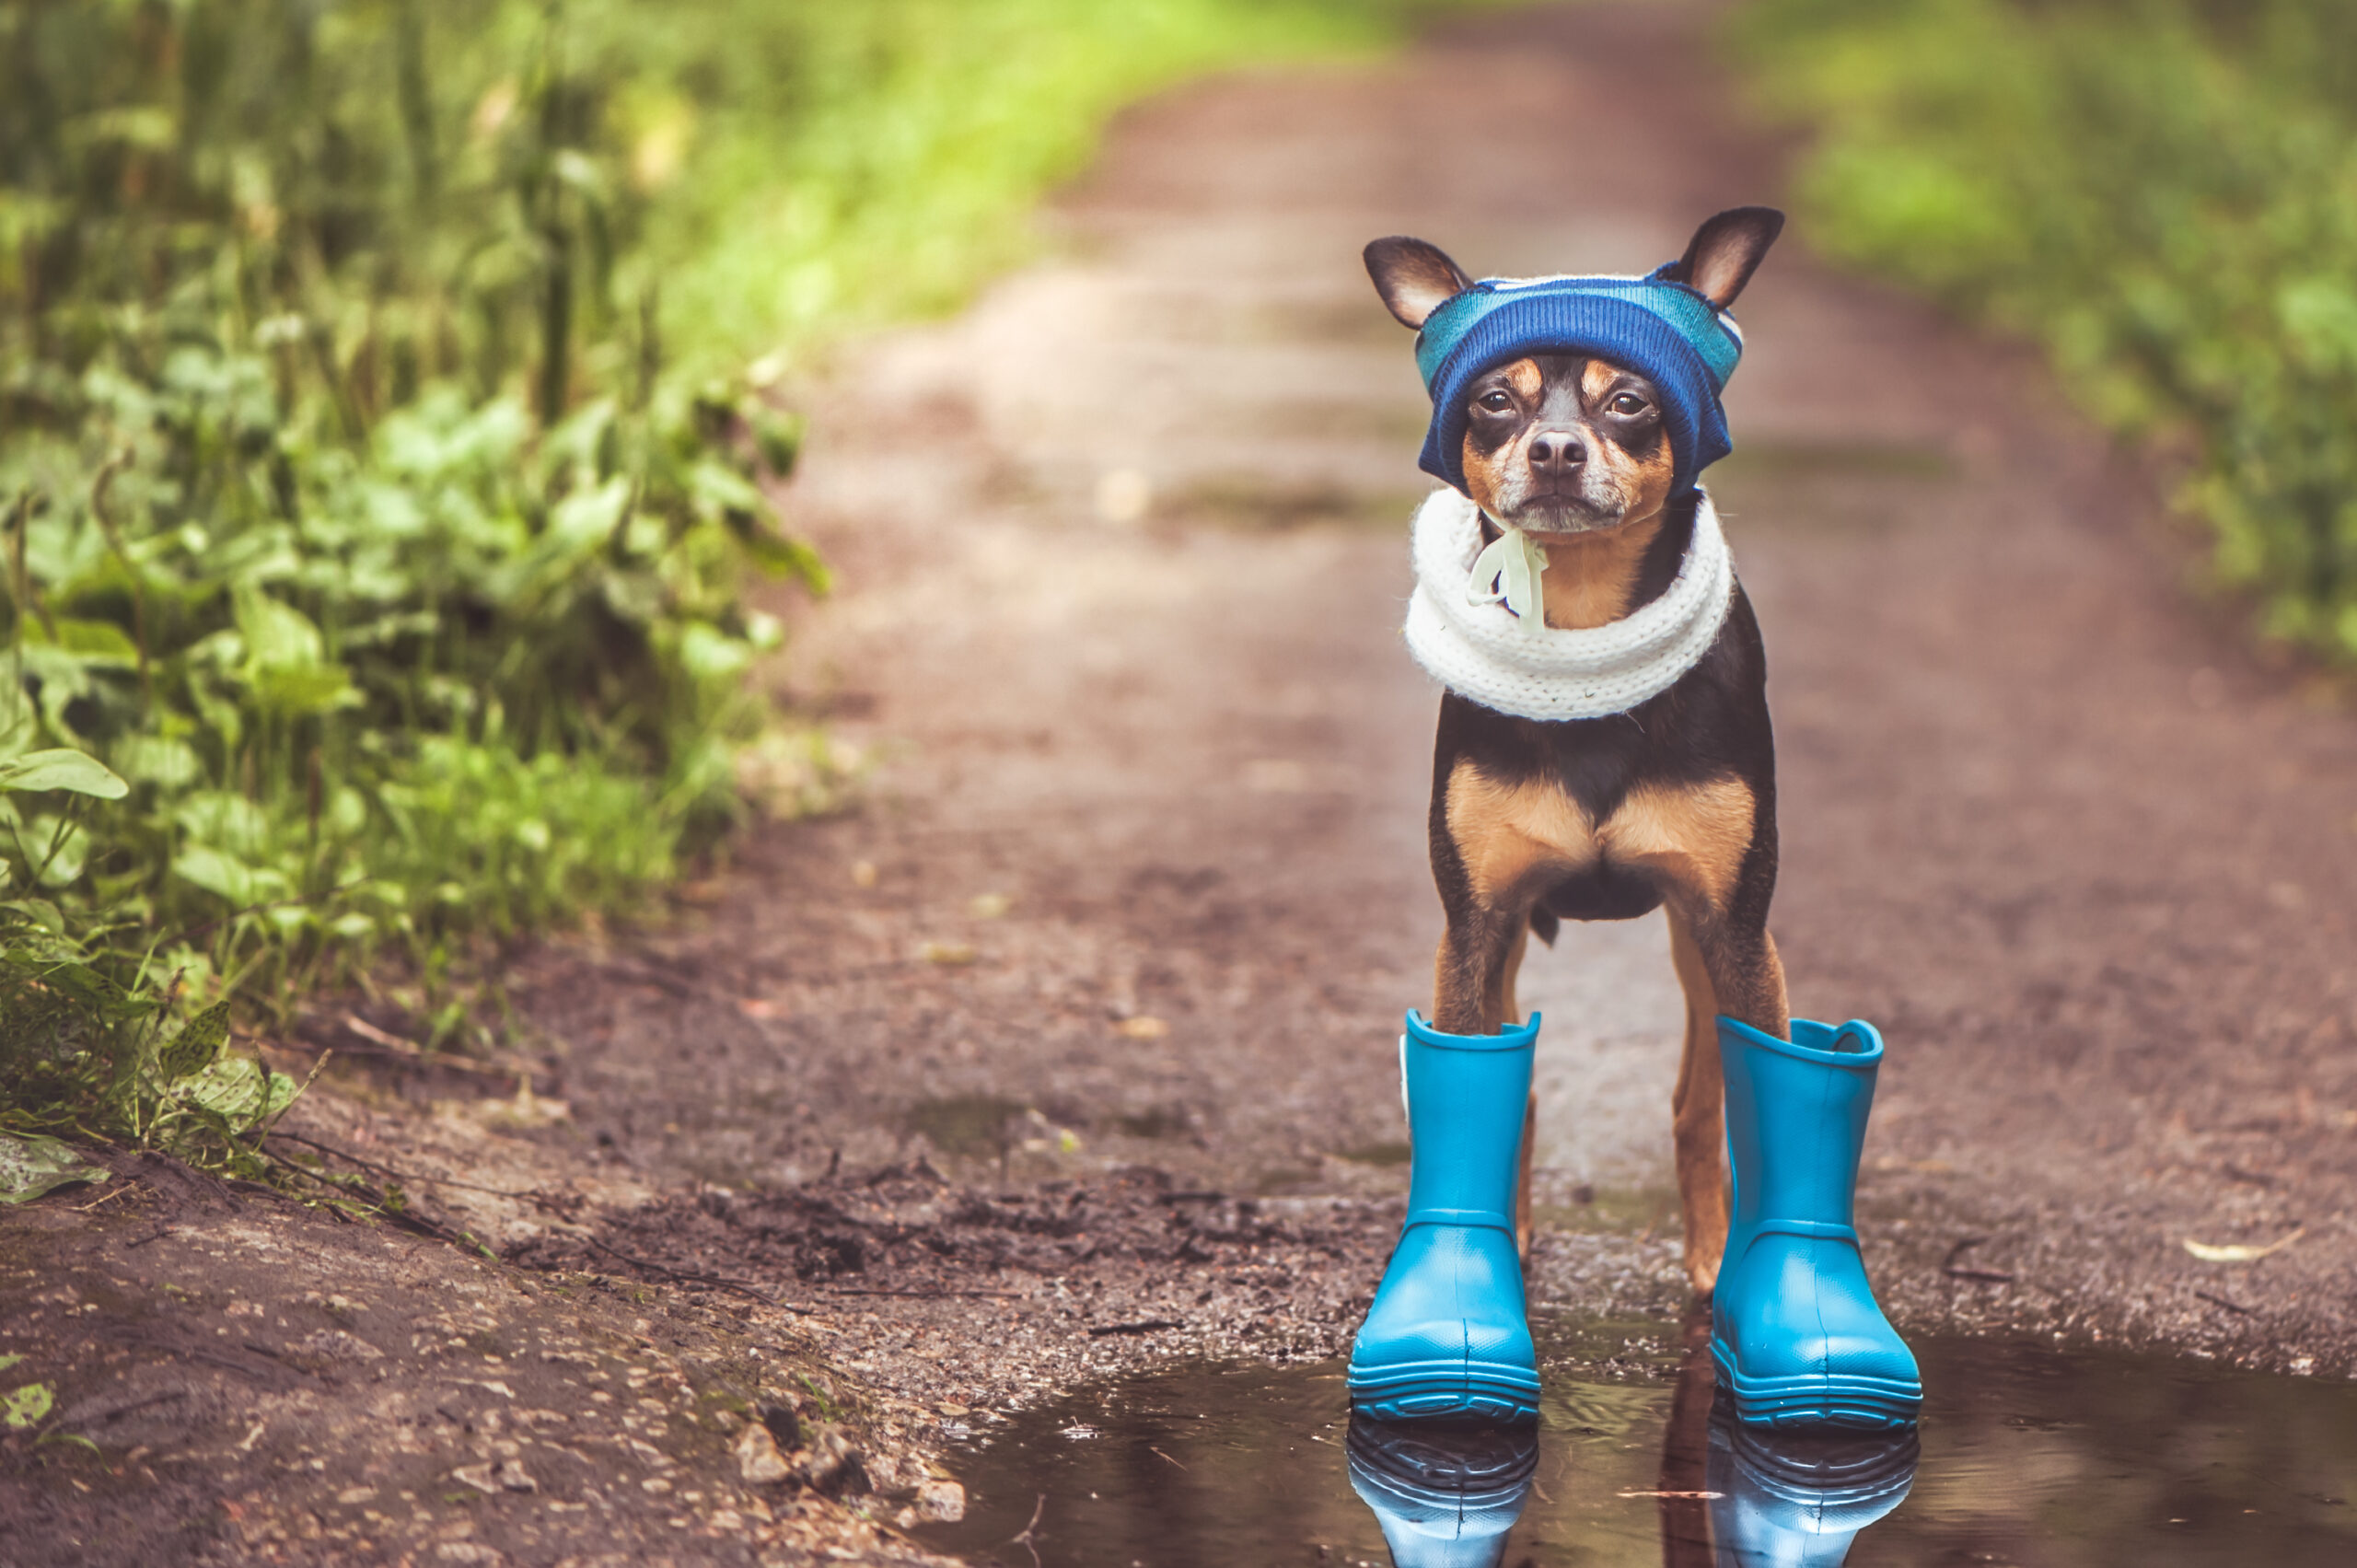 dog in shoes and cap standing